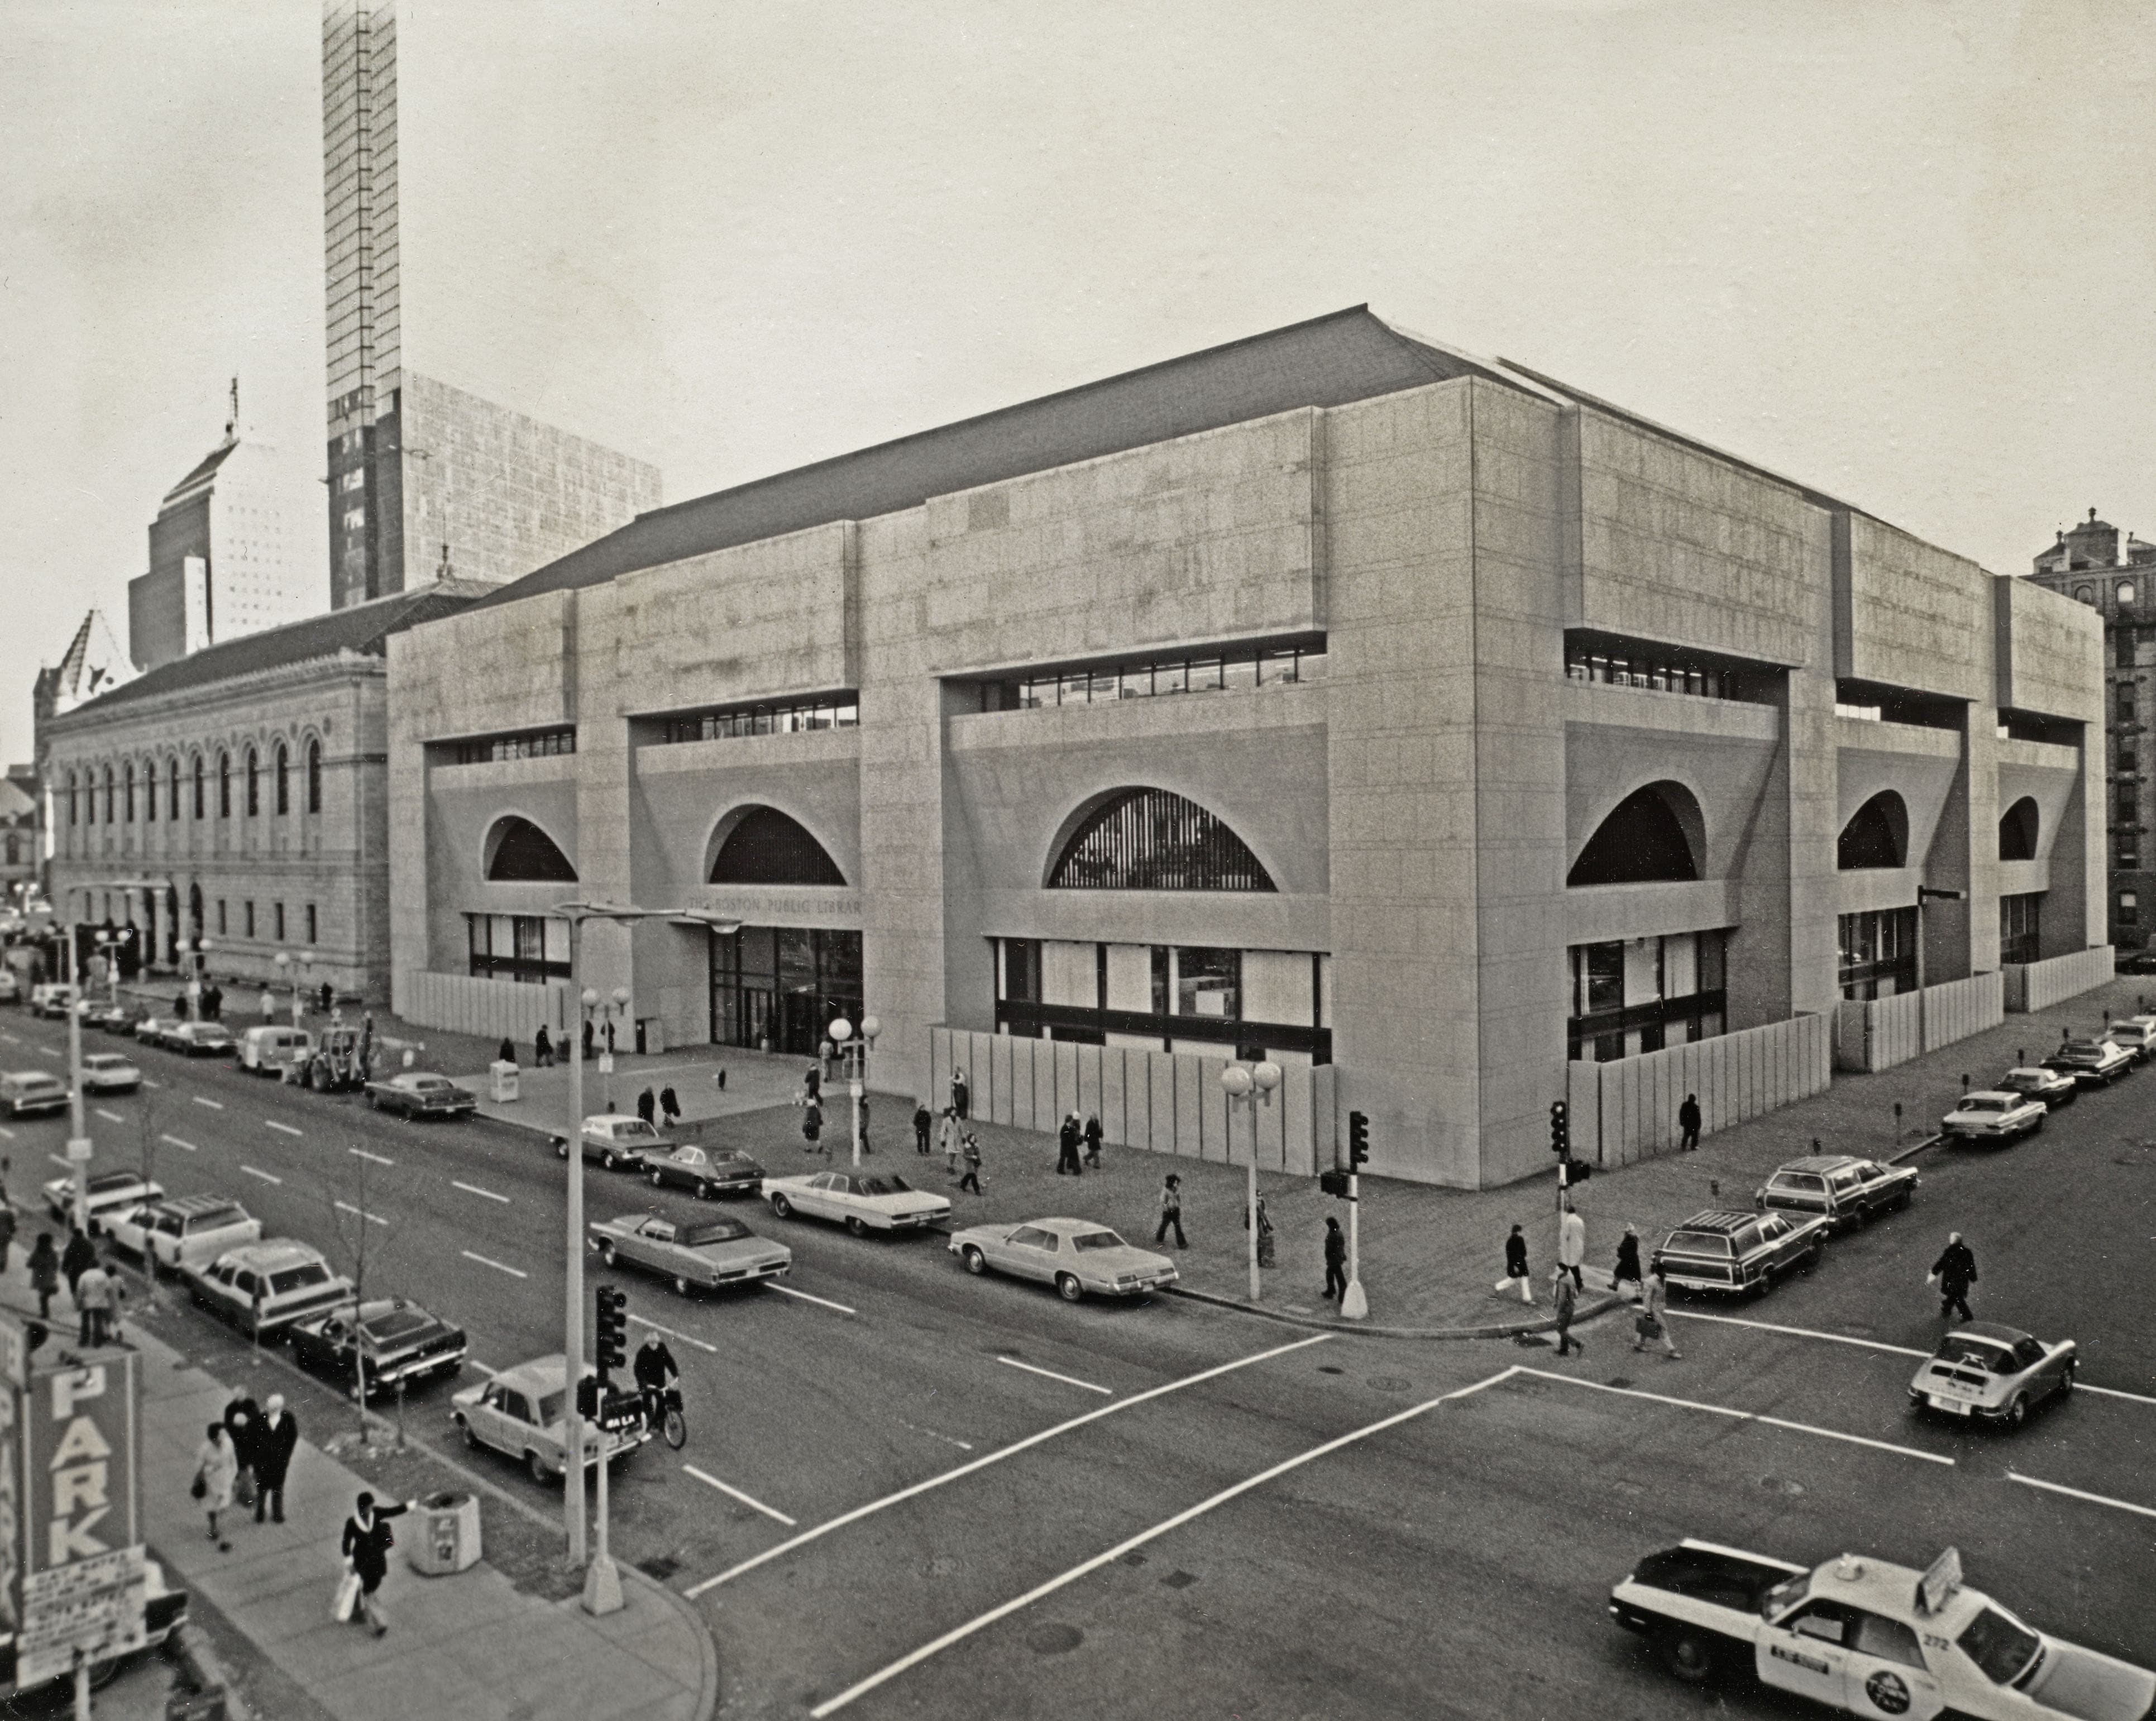 Photo of he exterior of the Johnson Building as it looked prior to the renovation